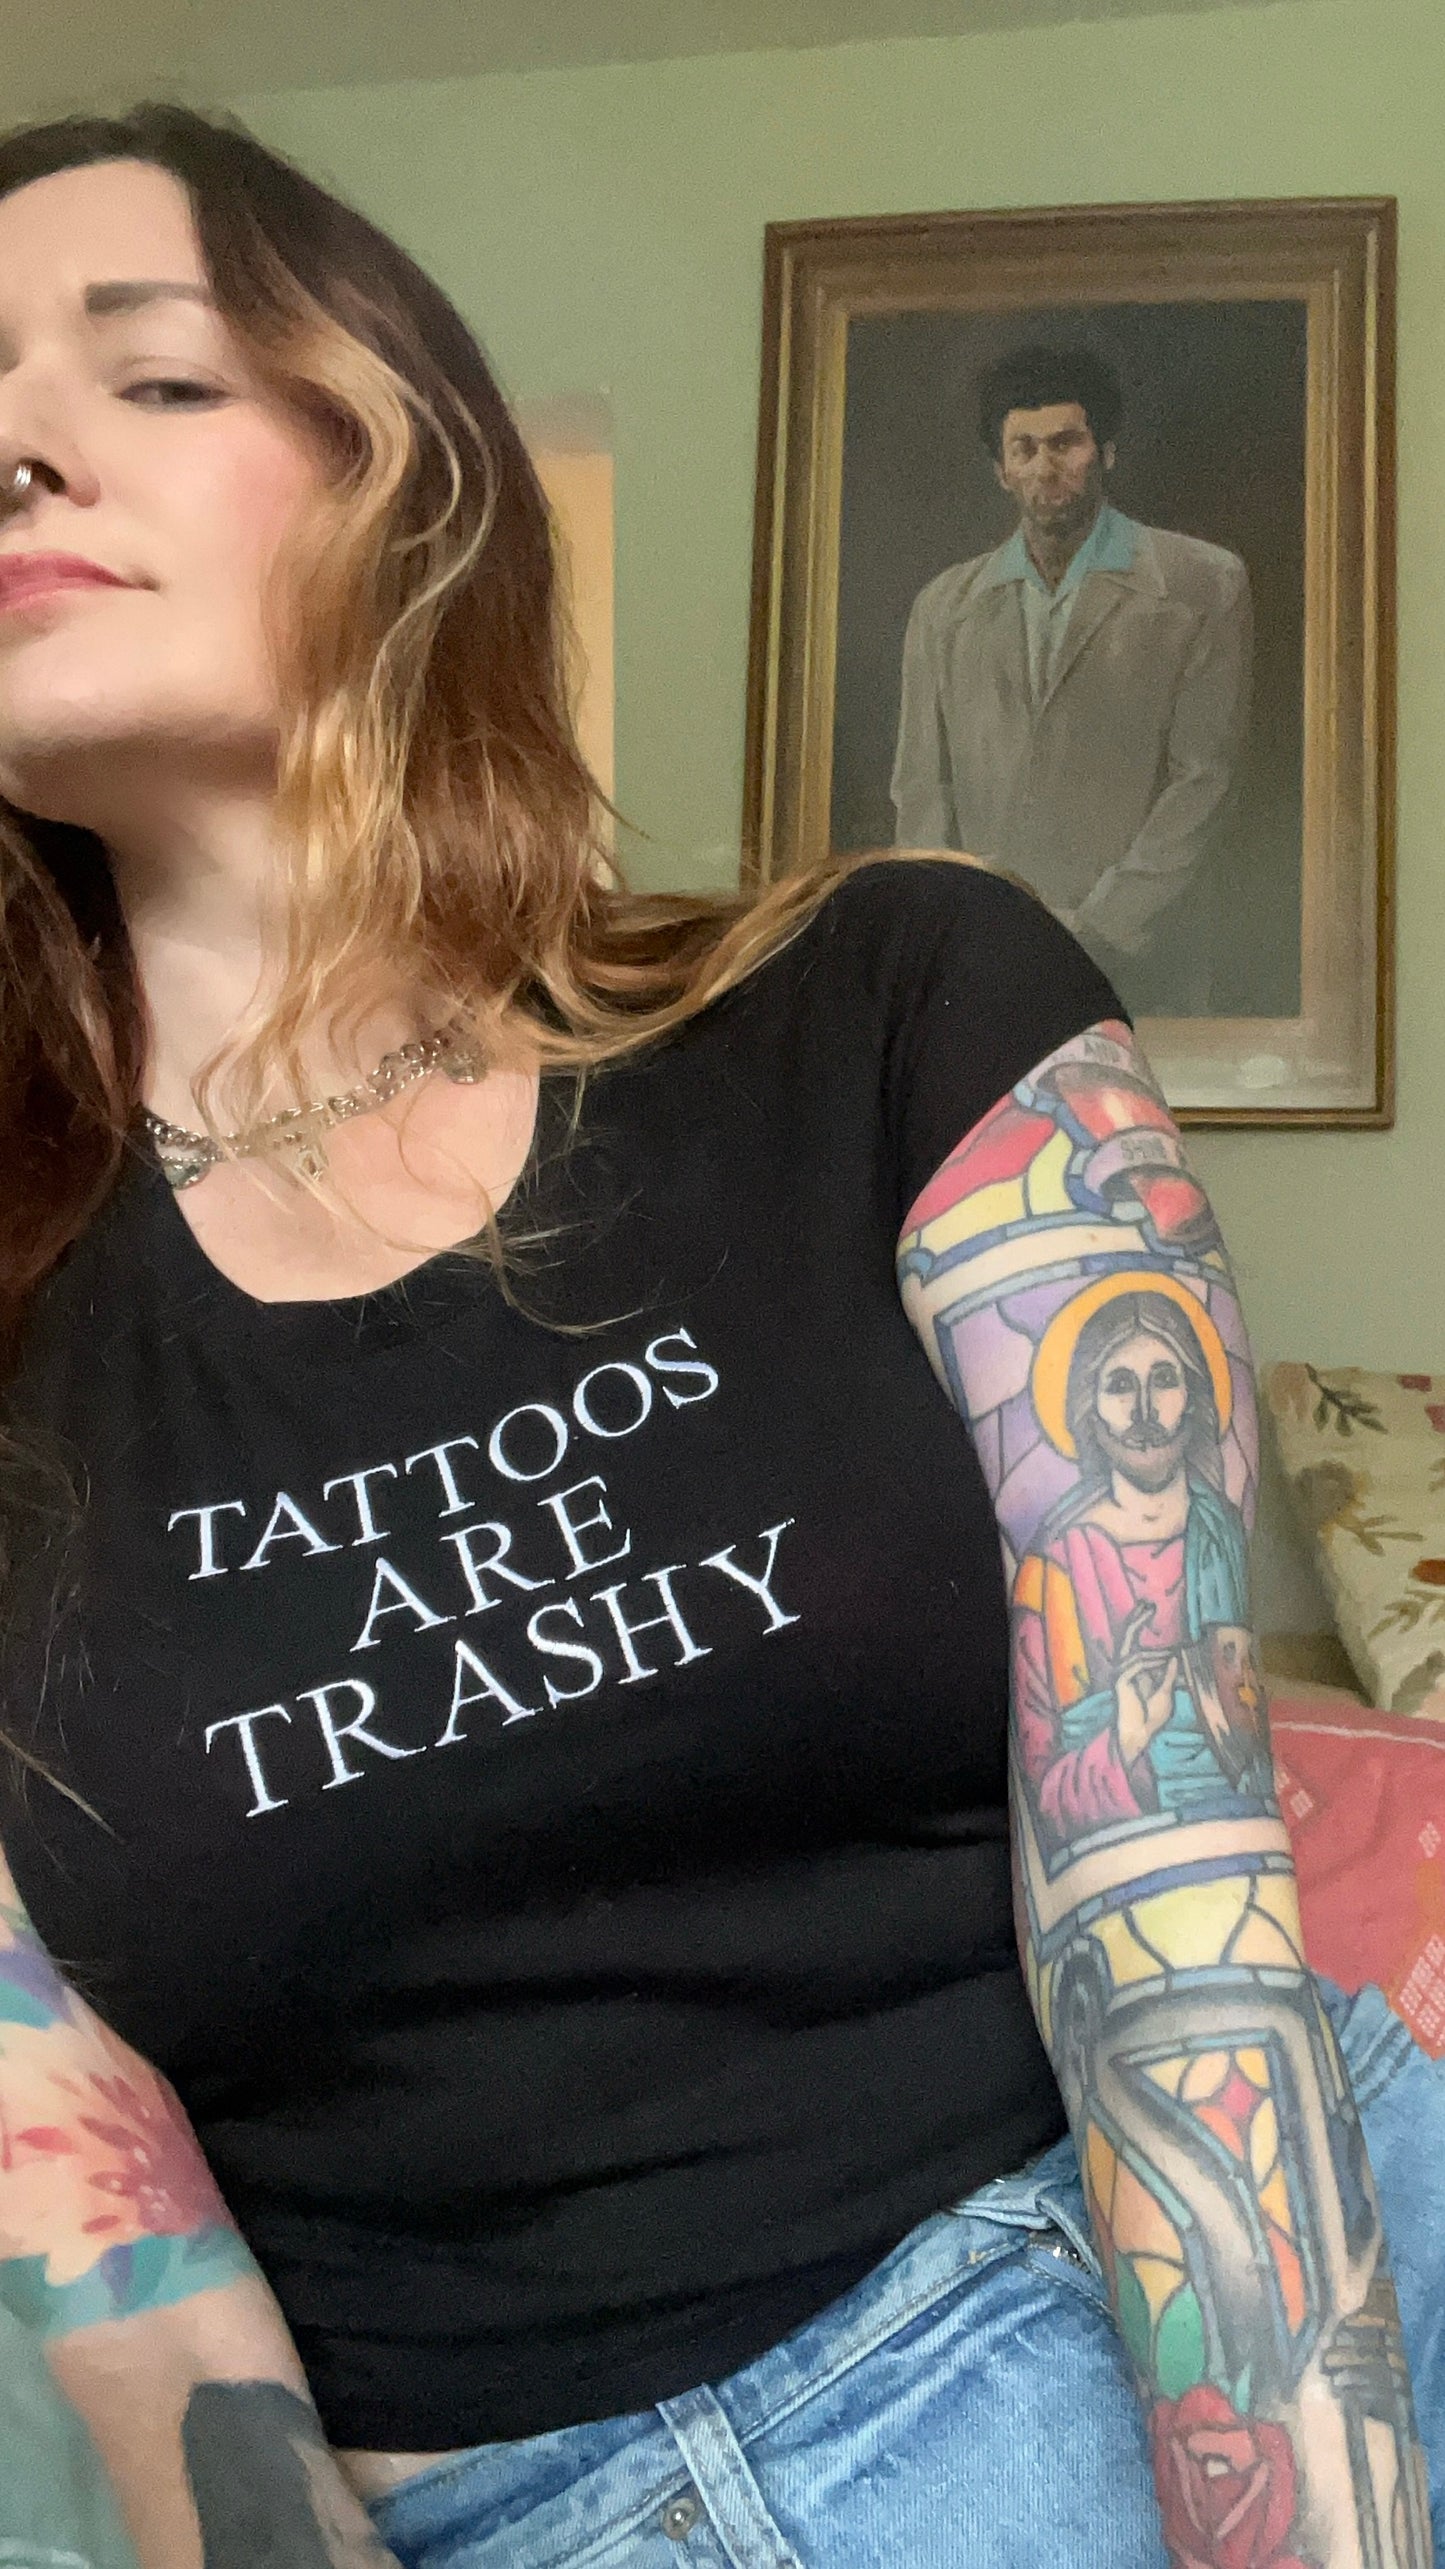 Tattoos Are Trashy Embroidered Tank Top or Baby Tee